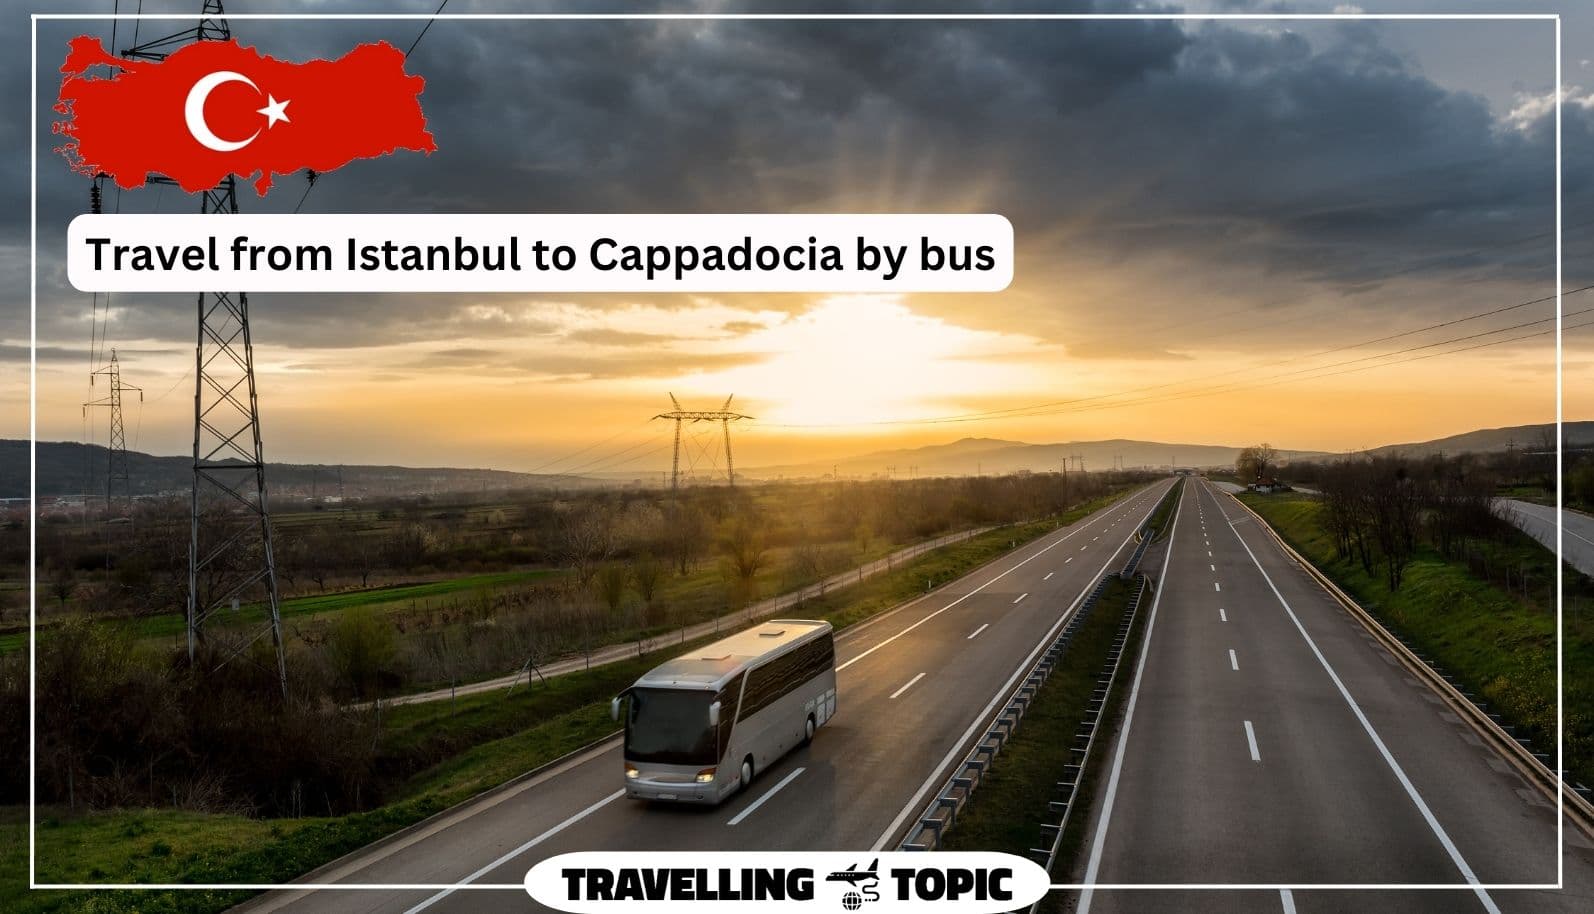 Travel from Istanbul to Cappadocia by bus